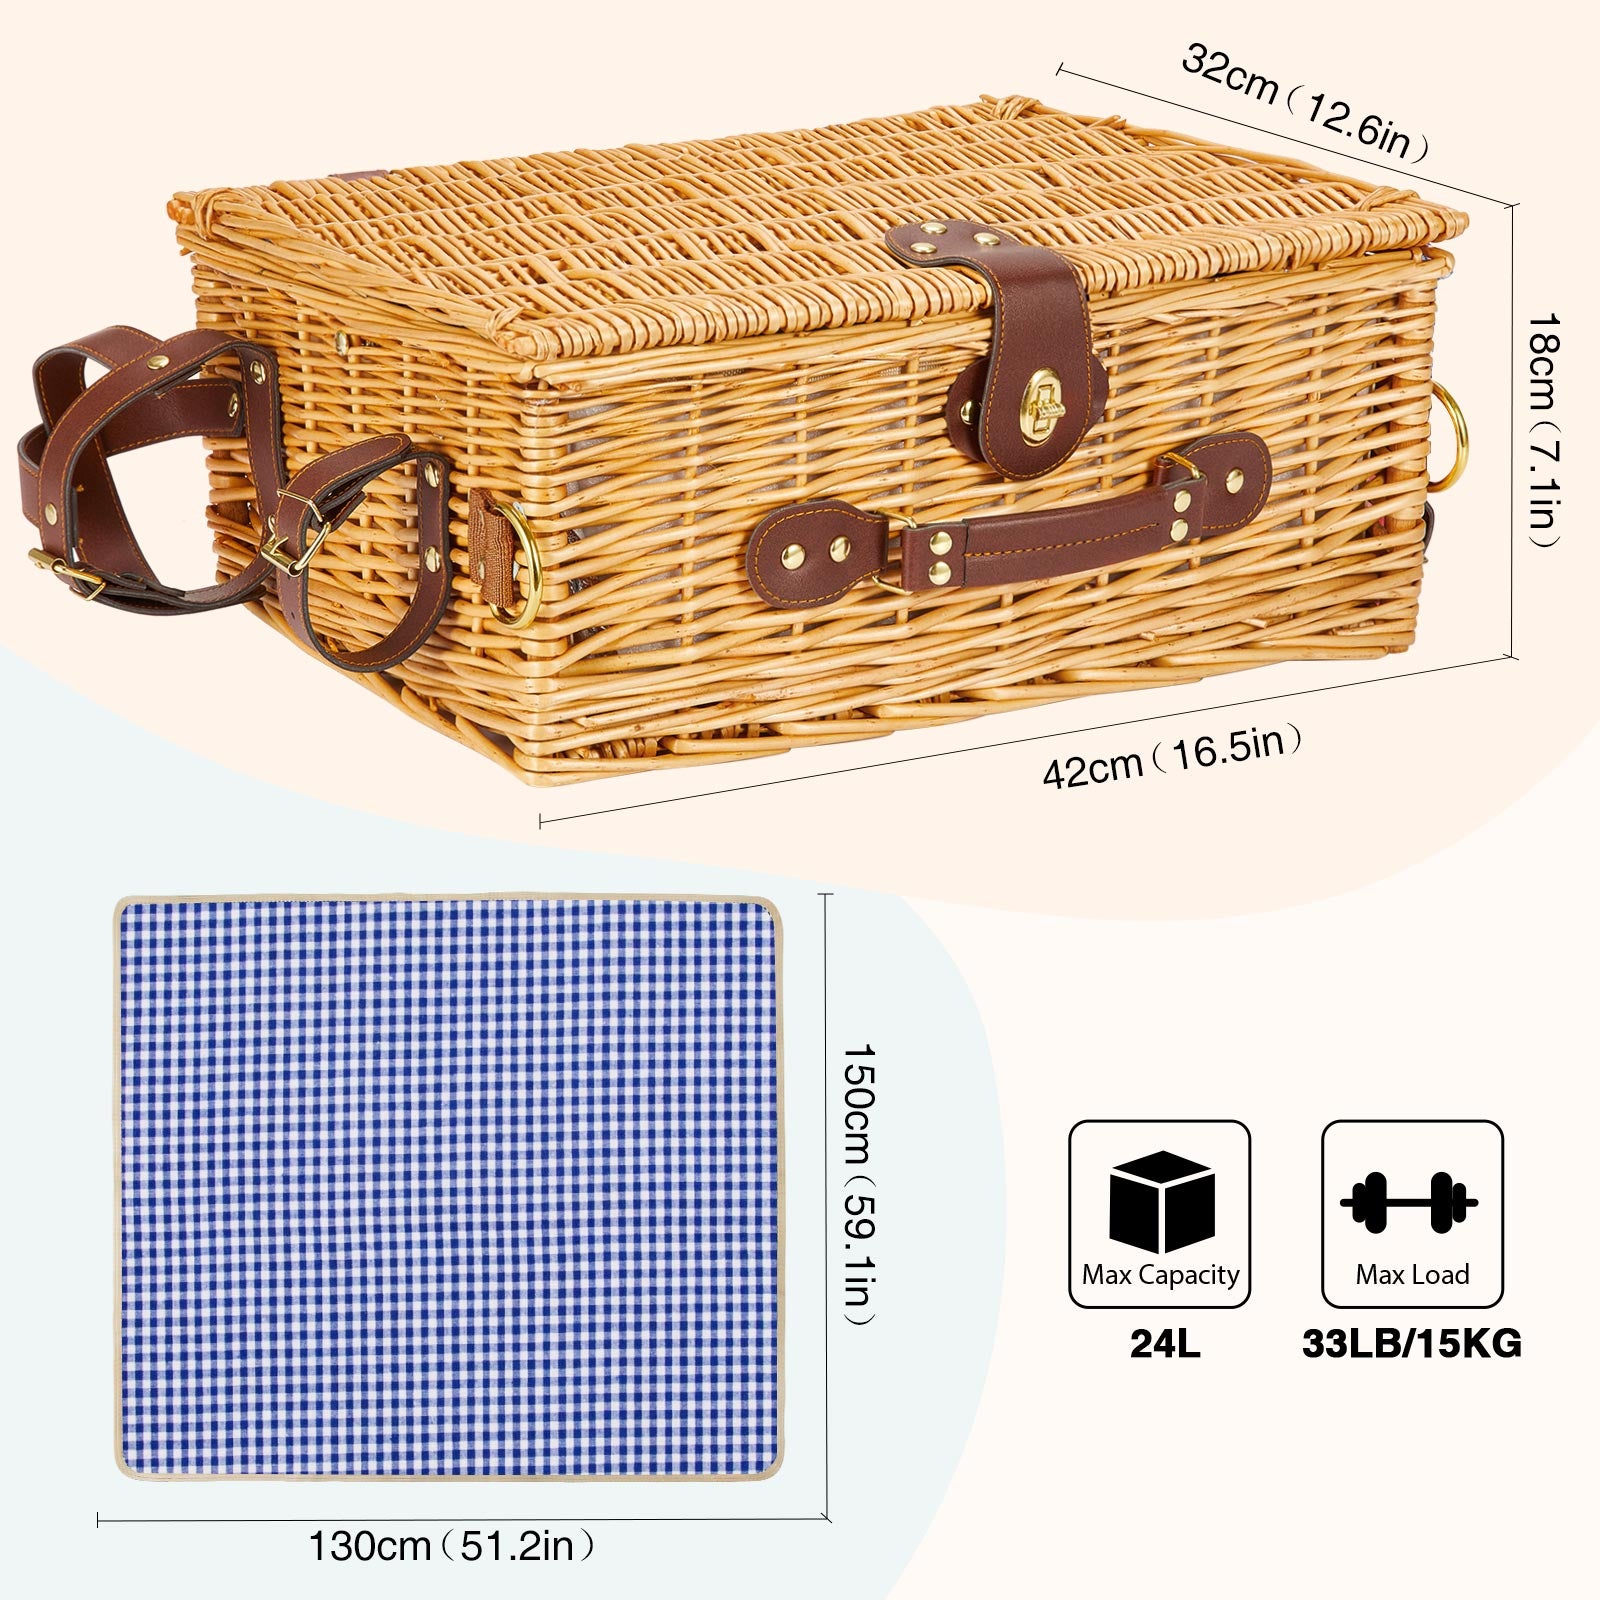 Insulation Wicker Greenstell Picnic Laye Sets High Sealing with Basket